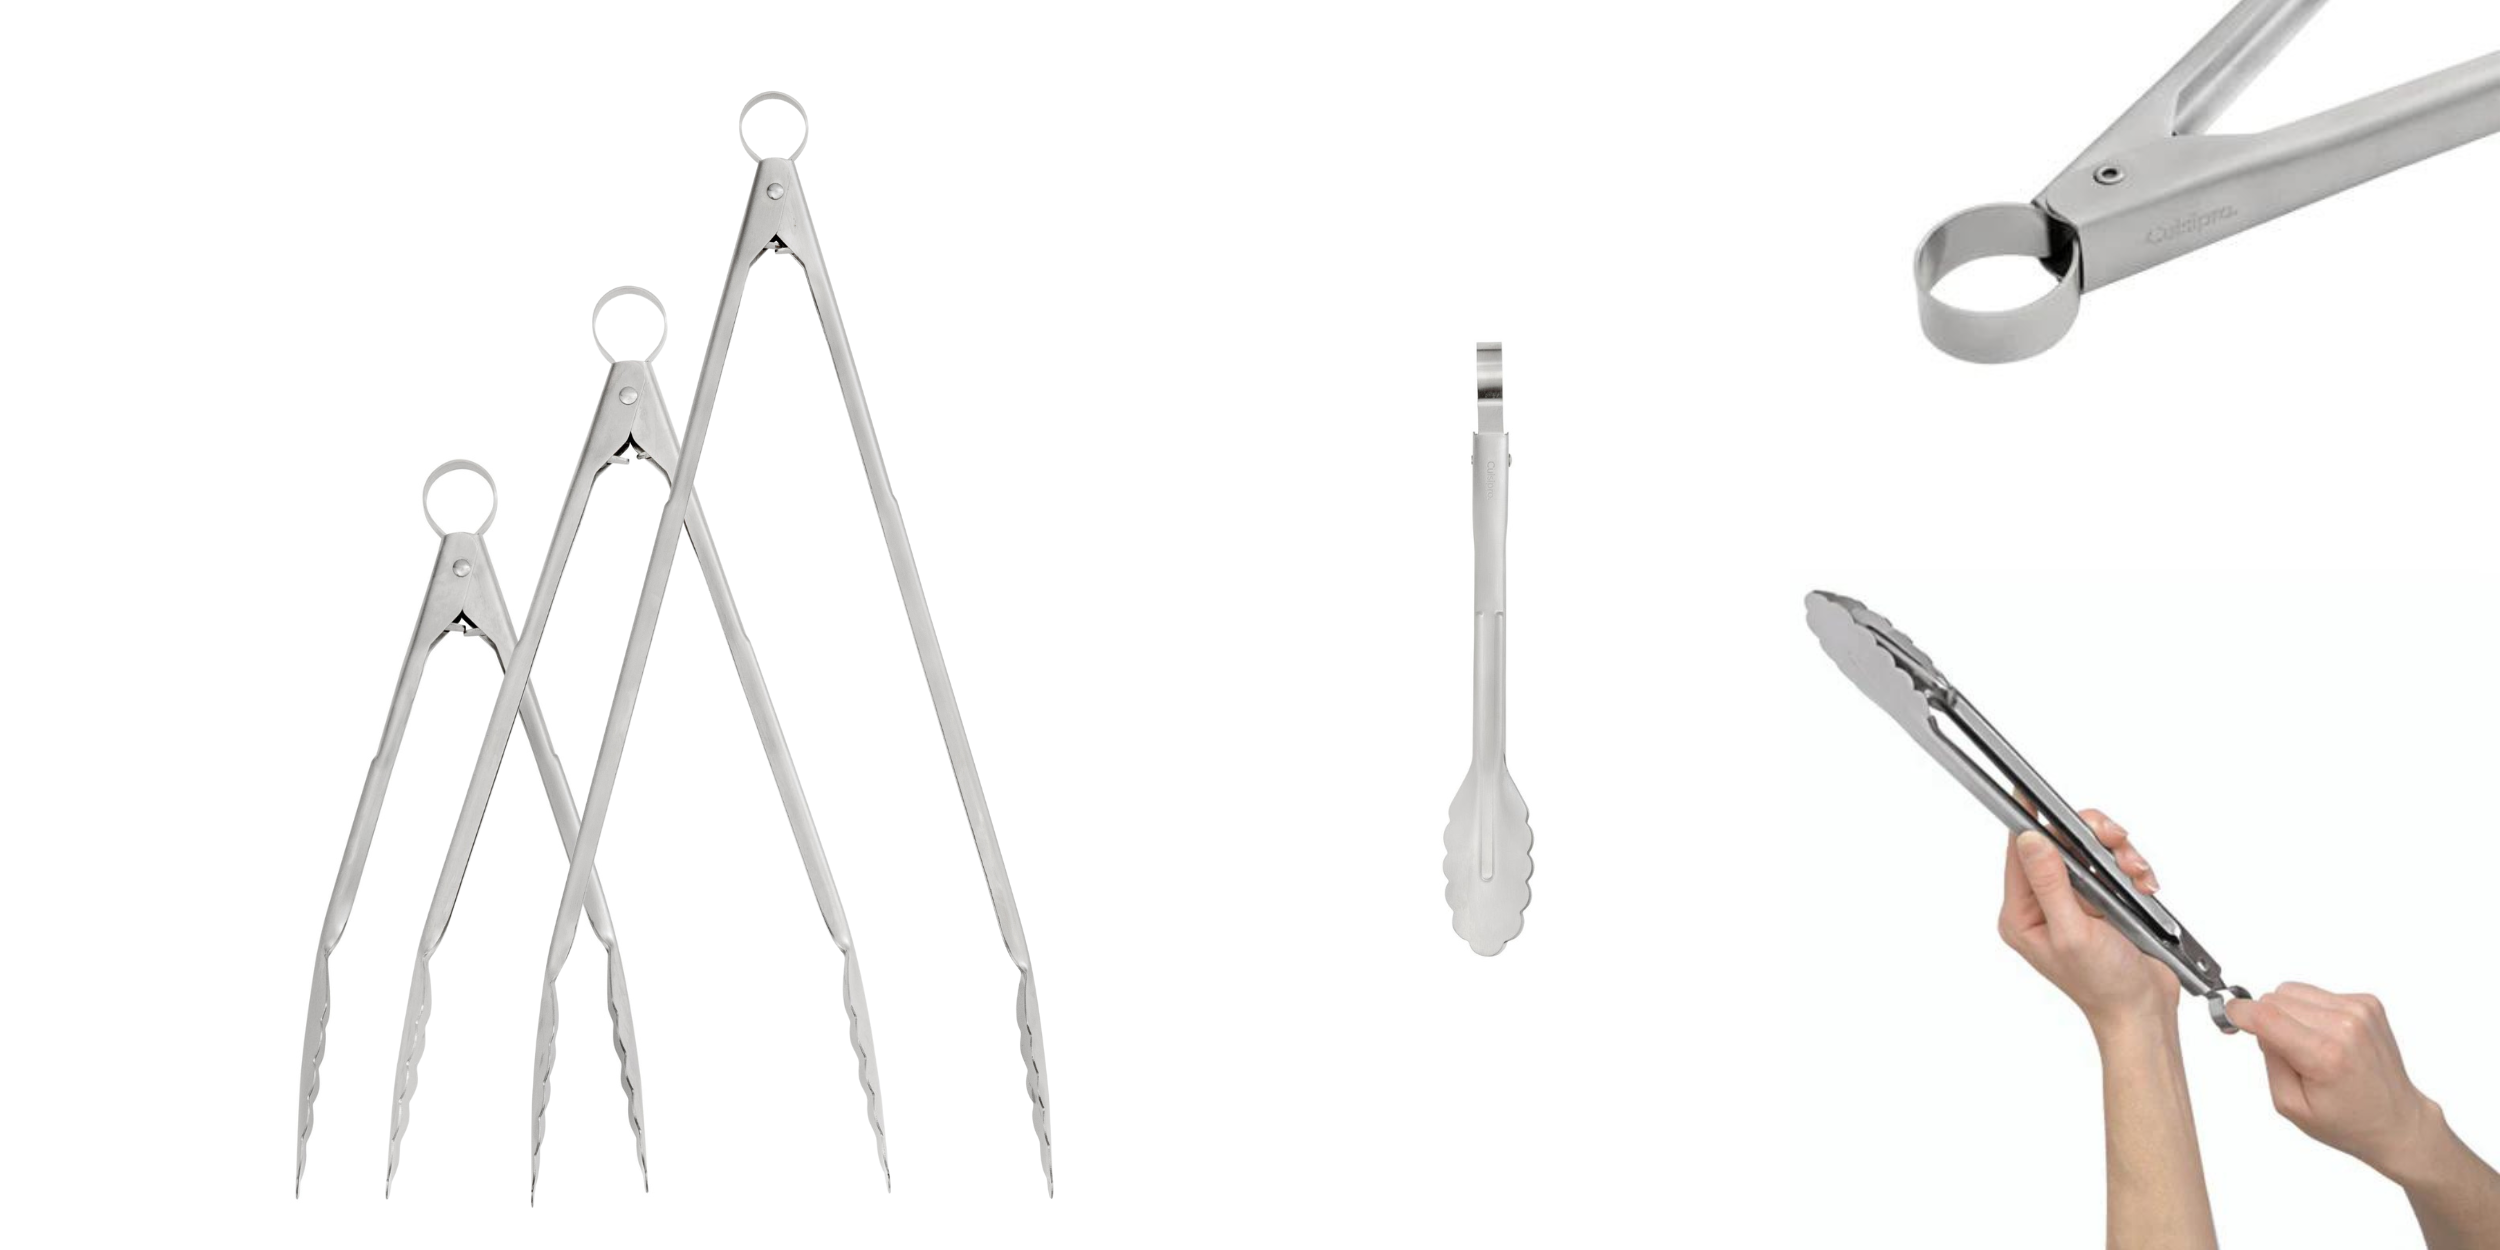 Cuisipro Locking Tongs in different sizes